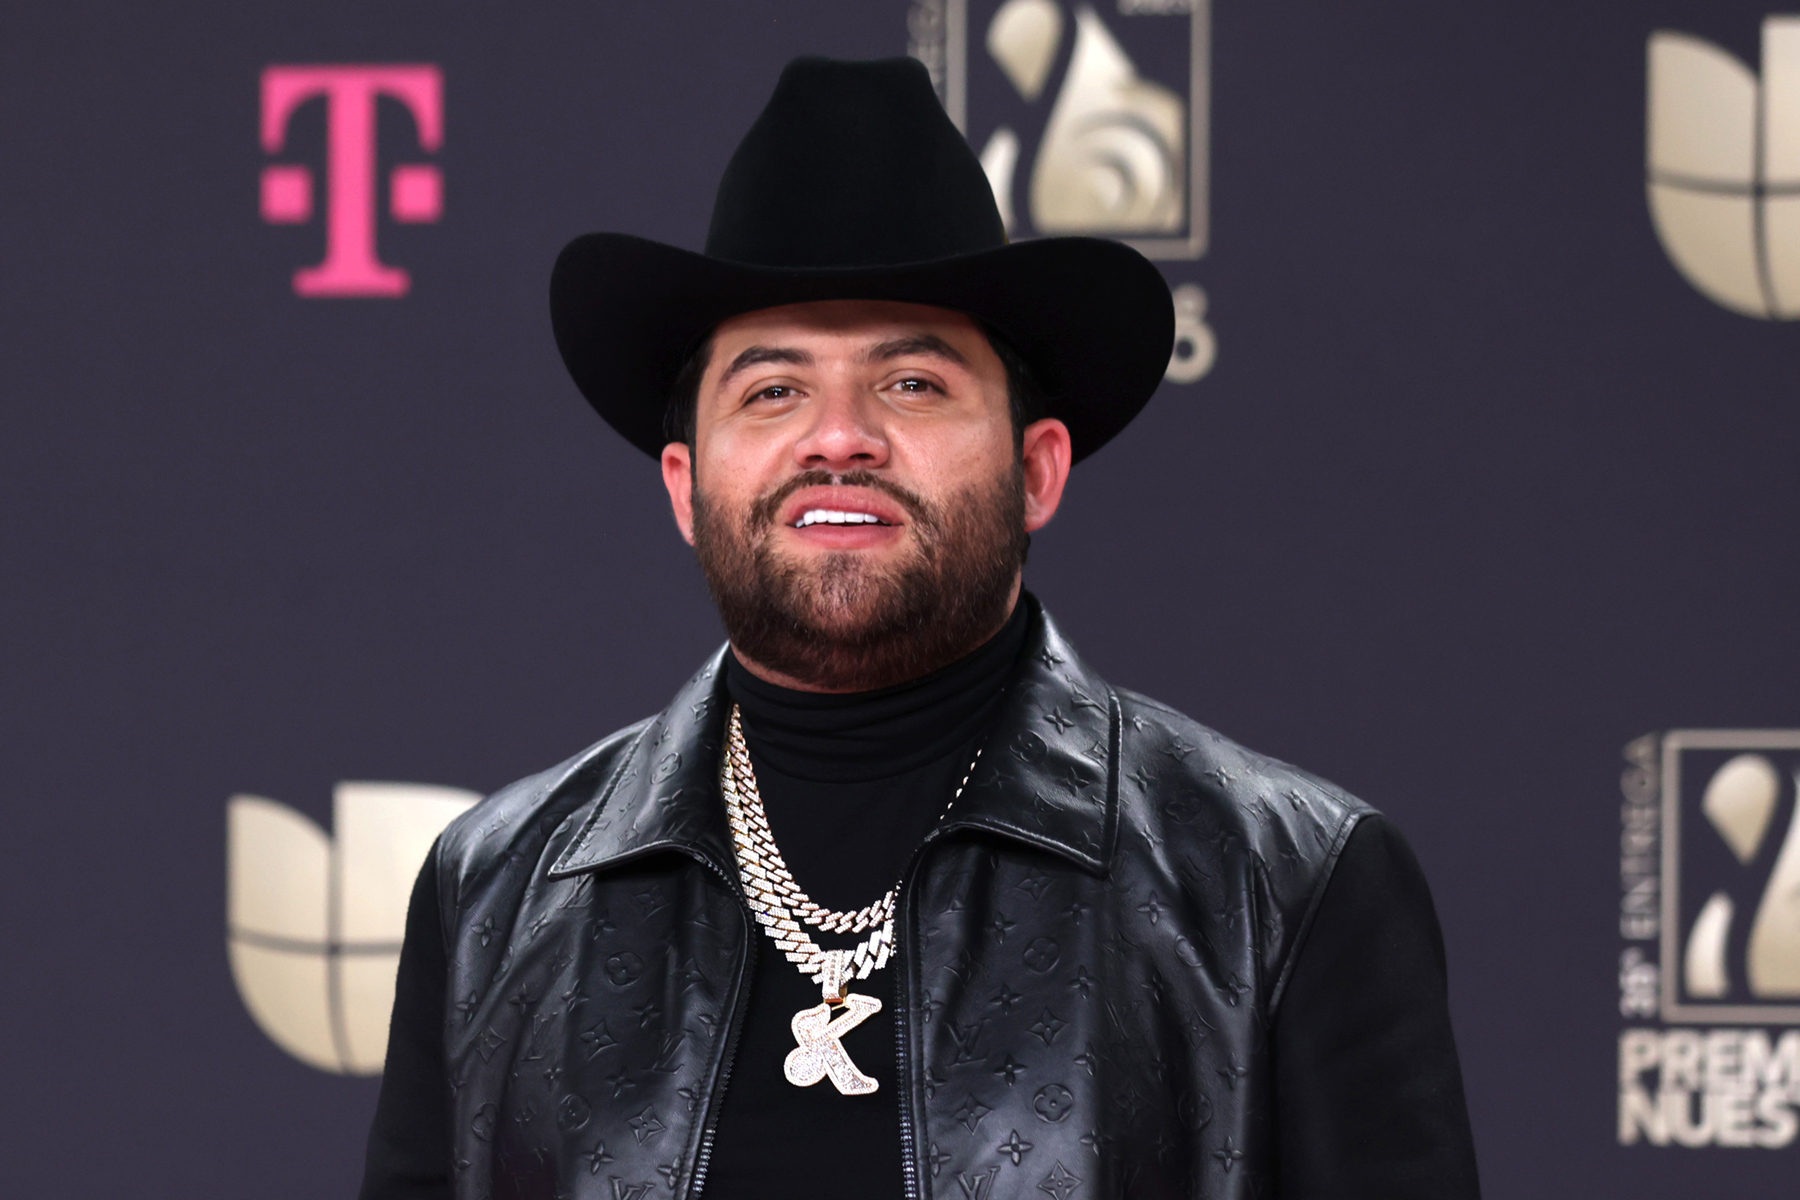 Luis R. Conriquez Wants to ‘Push Mexican Culture Forward' With New Album